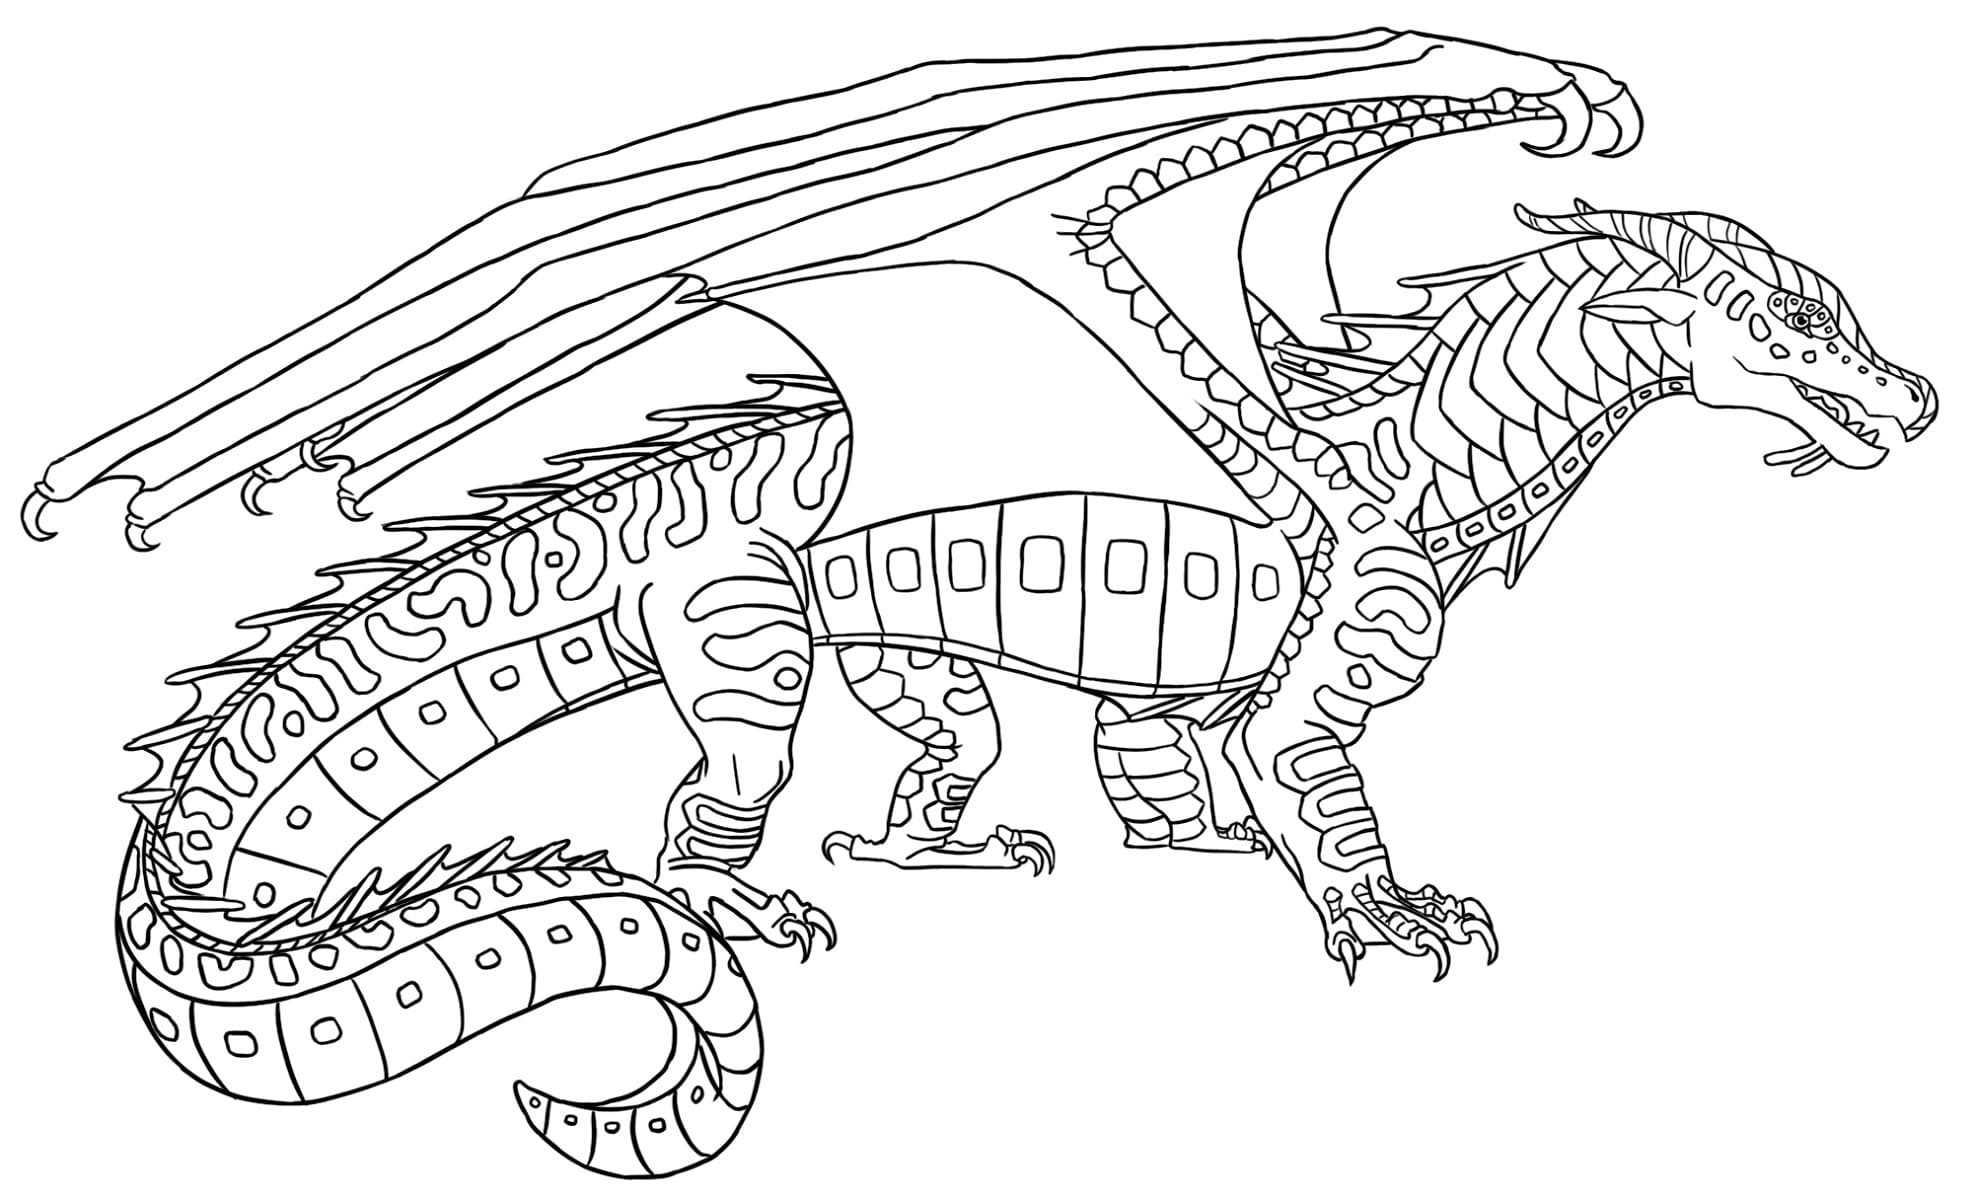 Raskrasil.com-Coloring-Pages-Wings-of-Fire-46